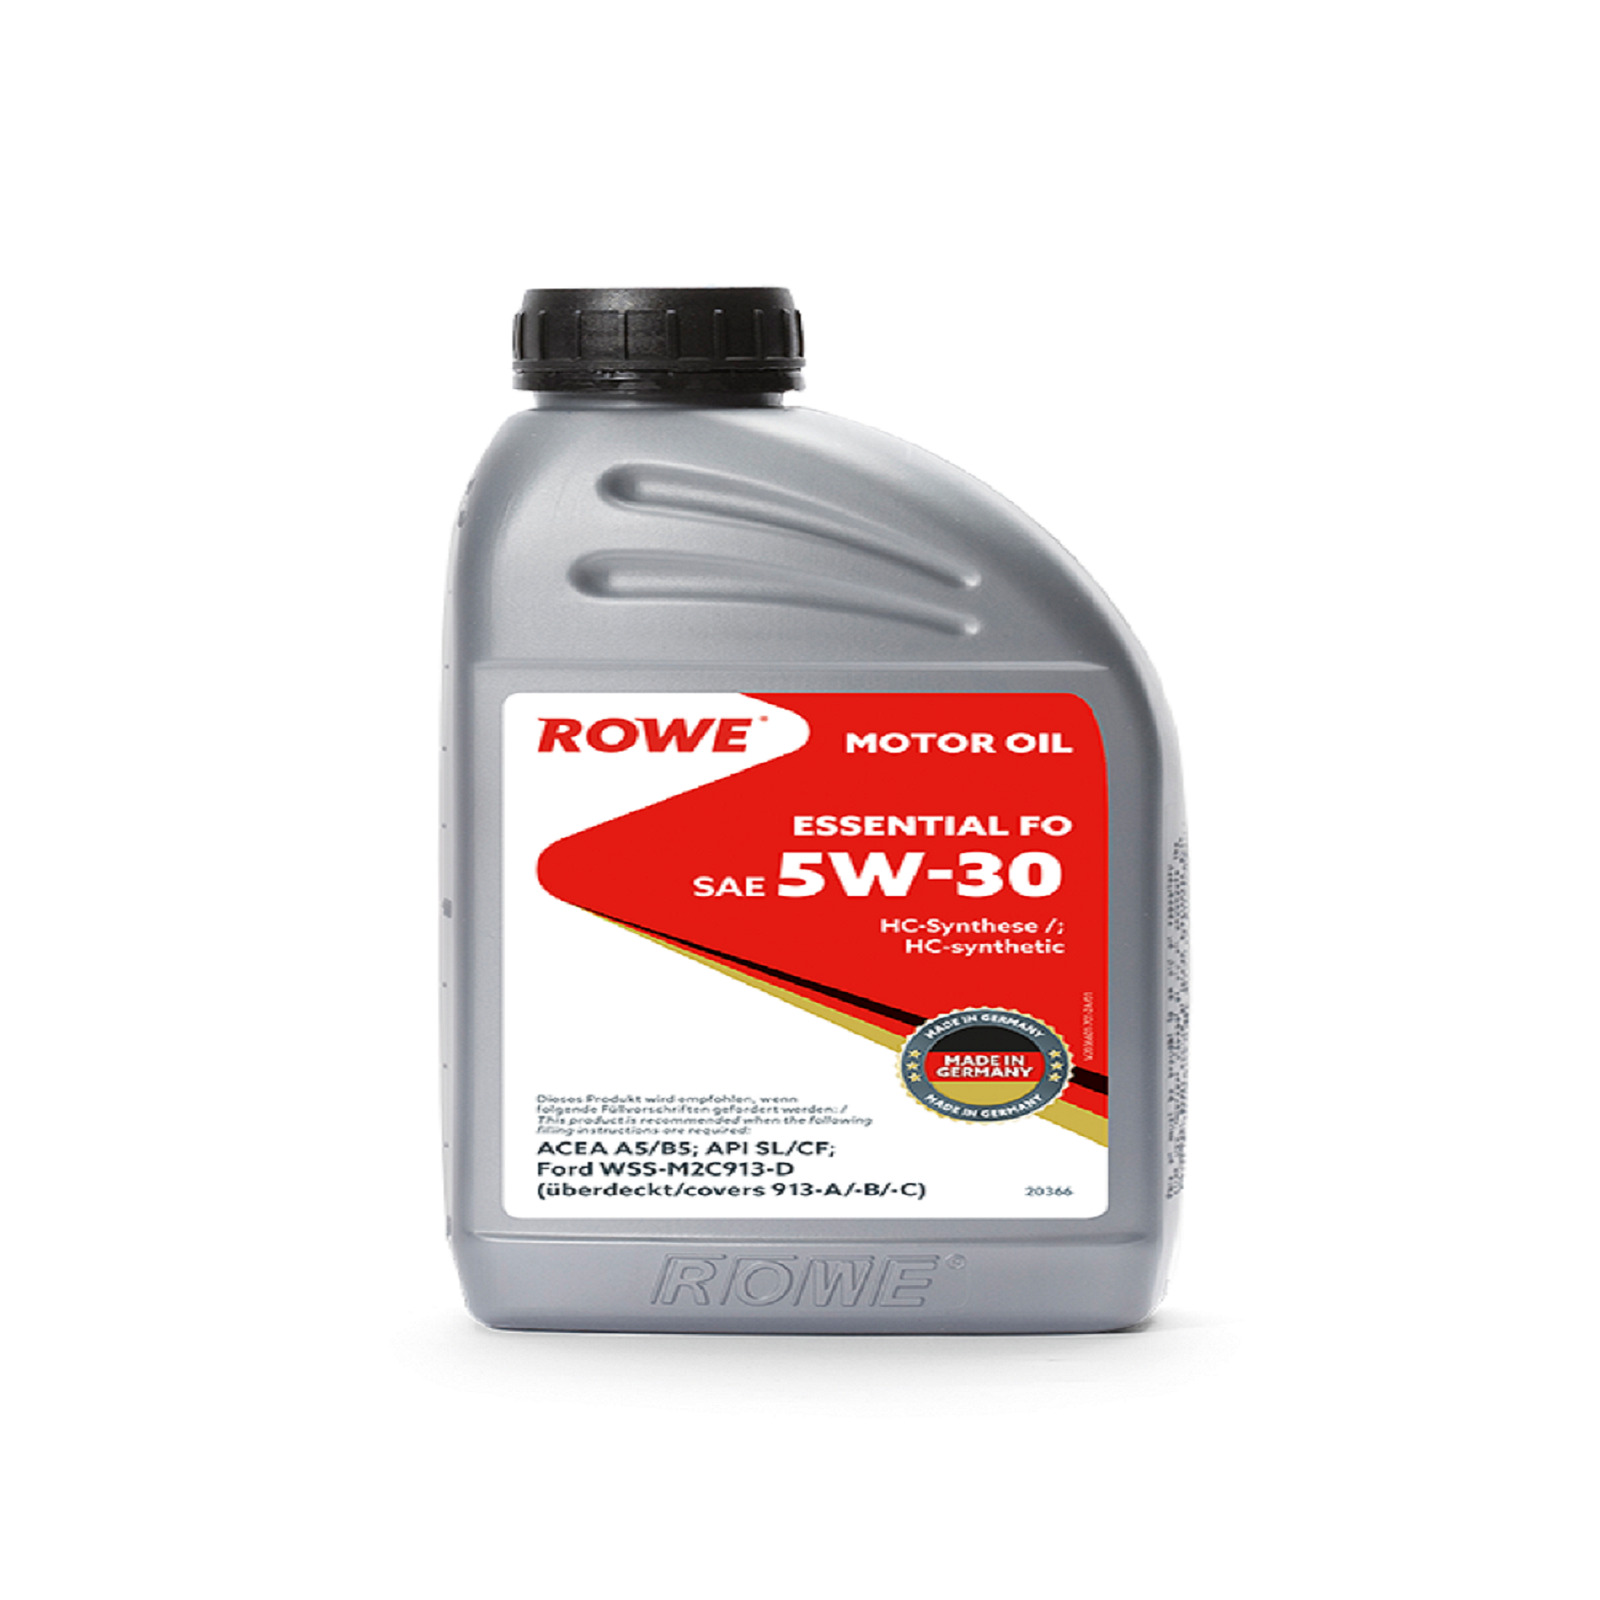 Rove масло. Rowe Essential SAE 5w-30 Fo. Рове масло 5w30. Масло Rowe Essential 5w30. Rowe 5w30 Fo 5 л.